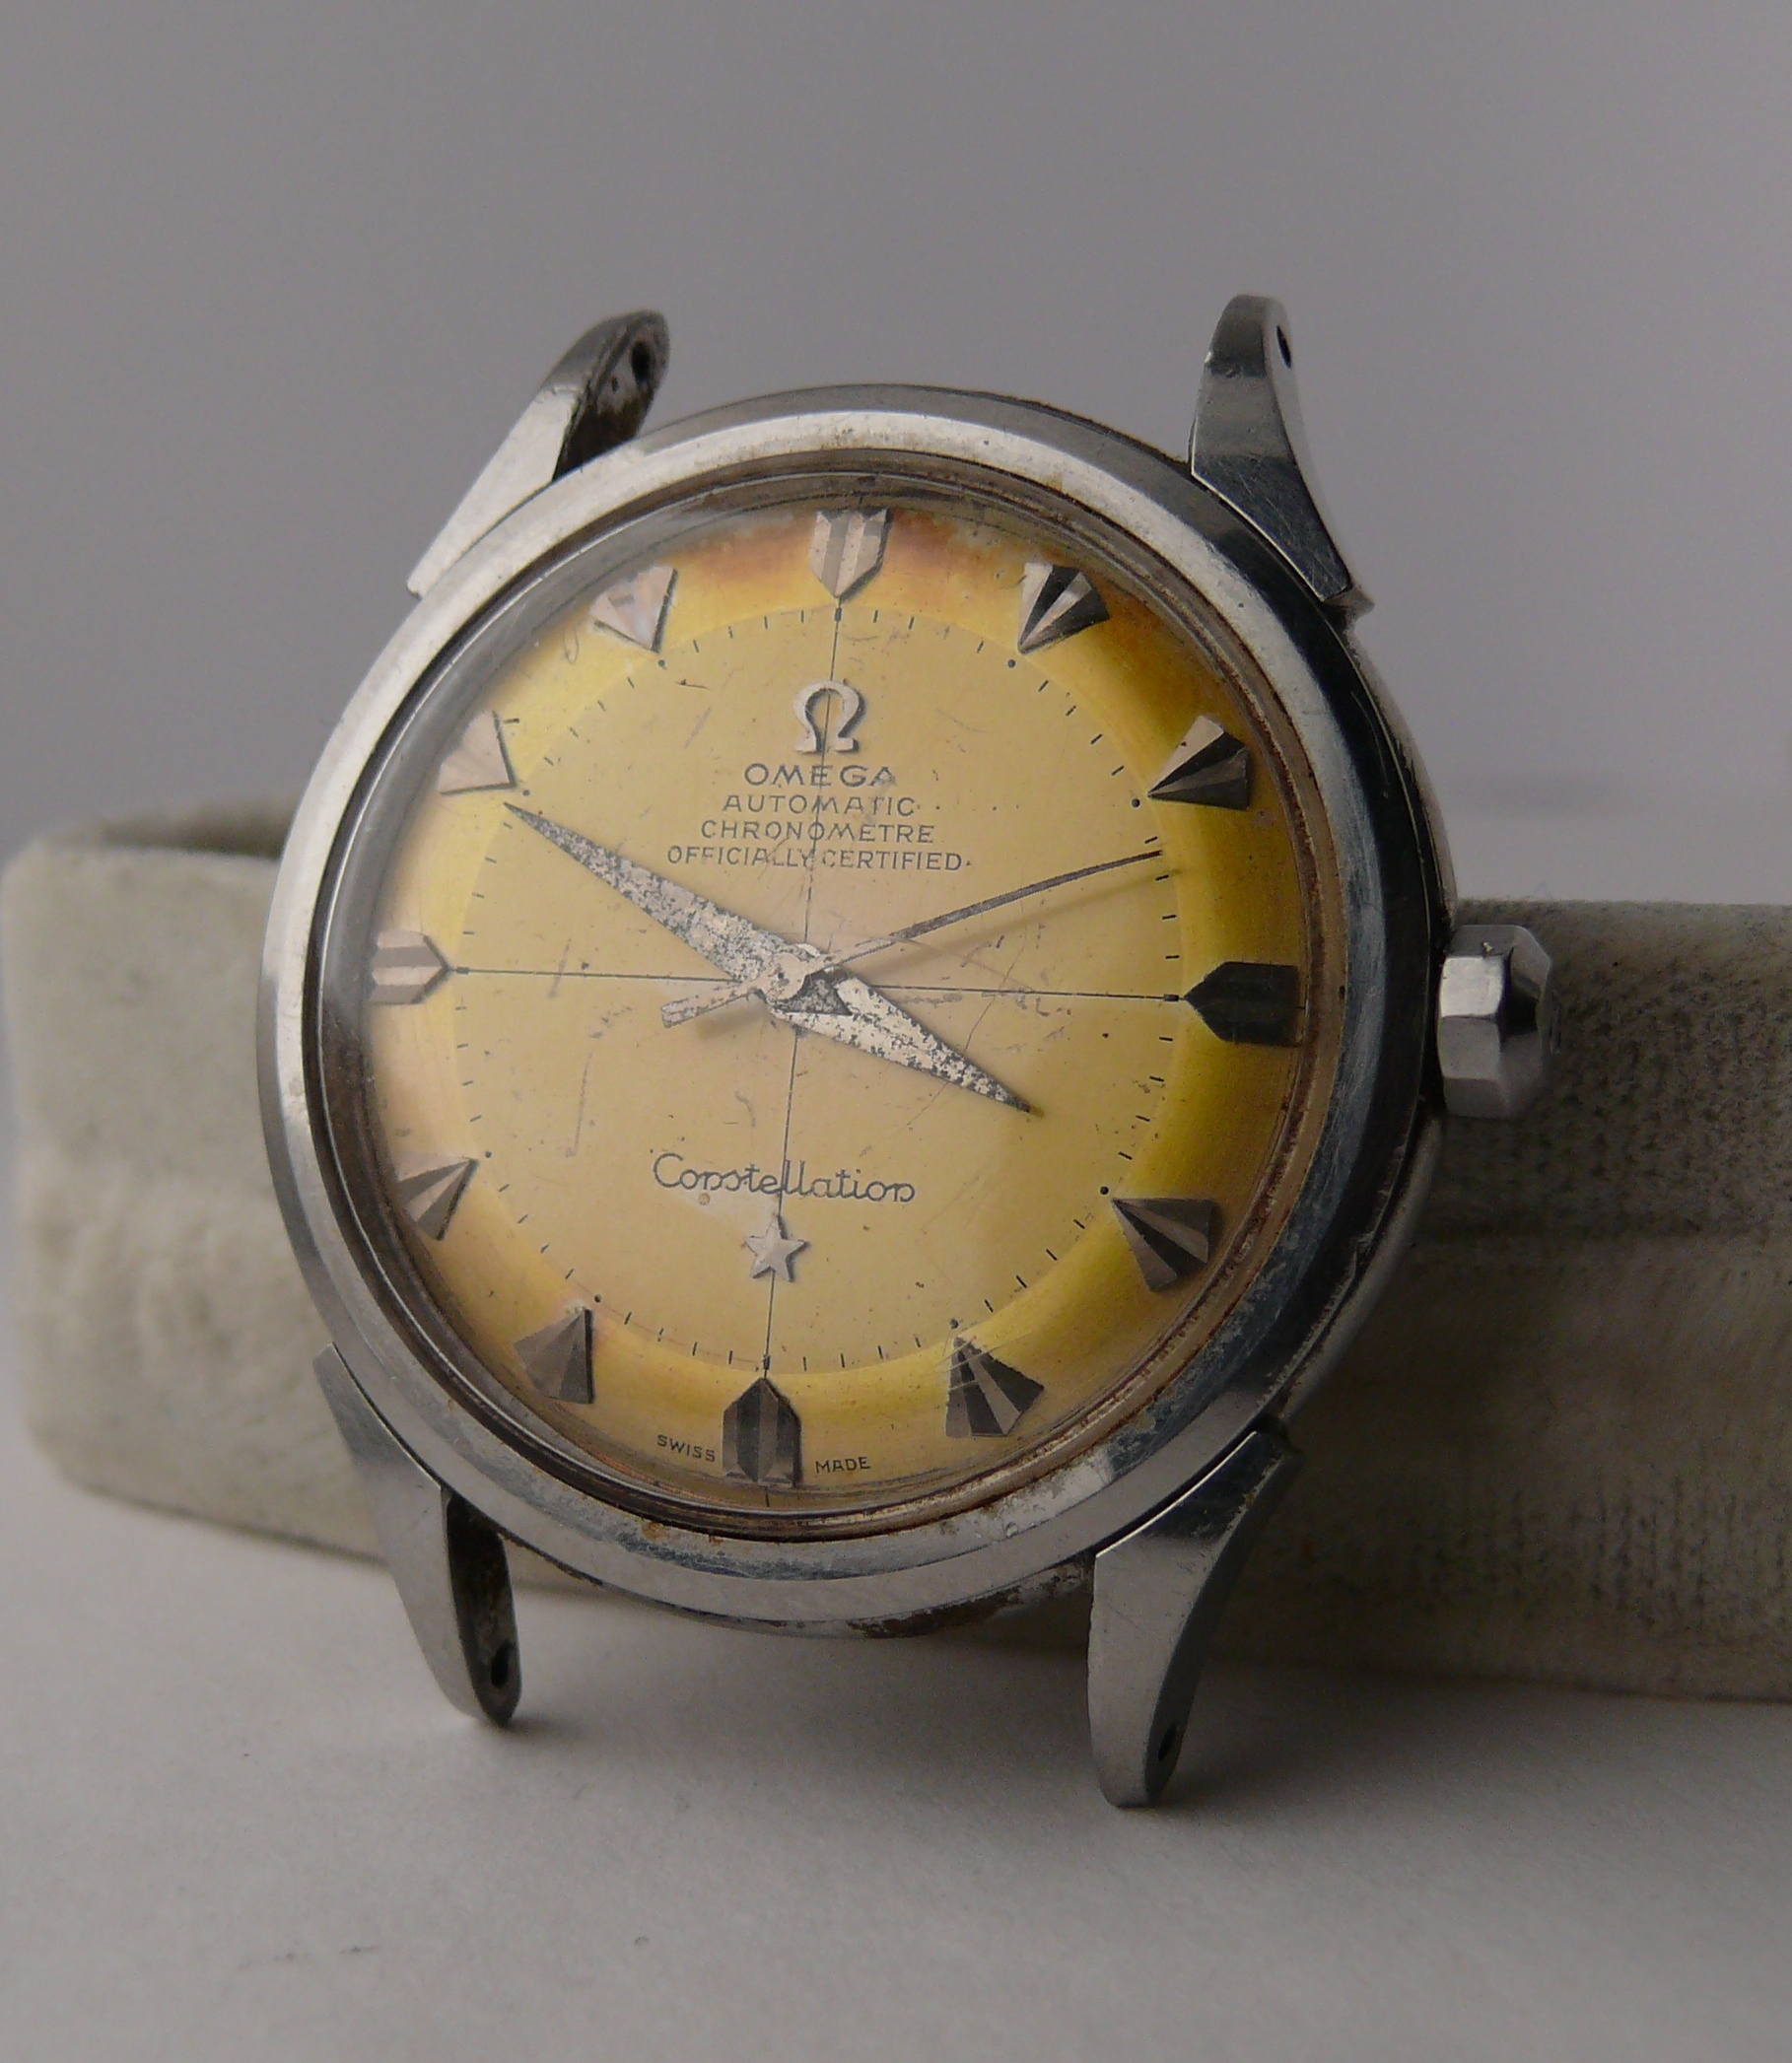 Vintage Omega Constellation Cronometre Certified Wristwatch Ref 2782. Original dial showing even “ - Image 6 of 12